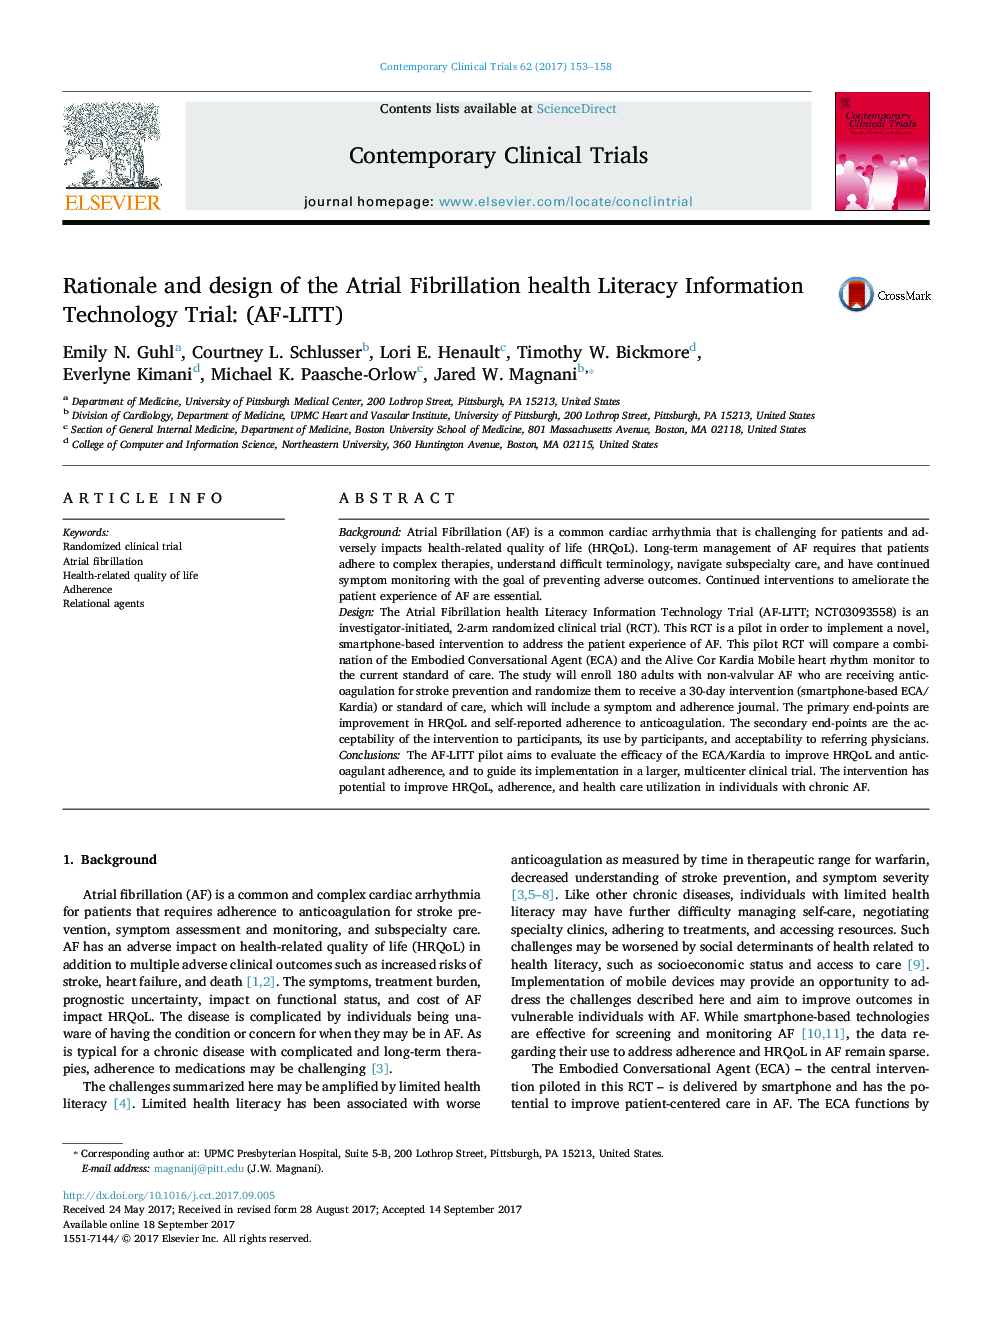 Rationale and design of the Atrial Fibrillation health Literacy Information Technology Trial: (AF-LITT)